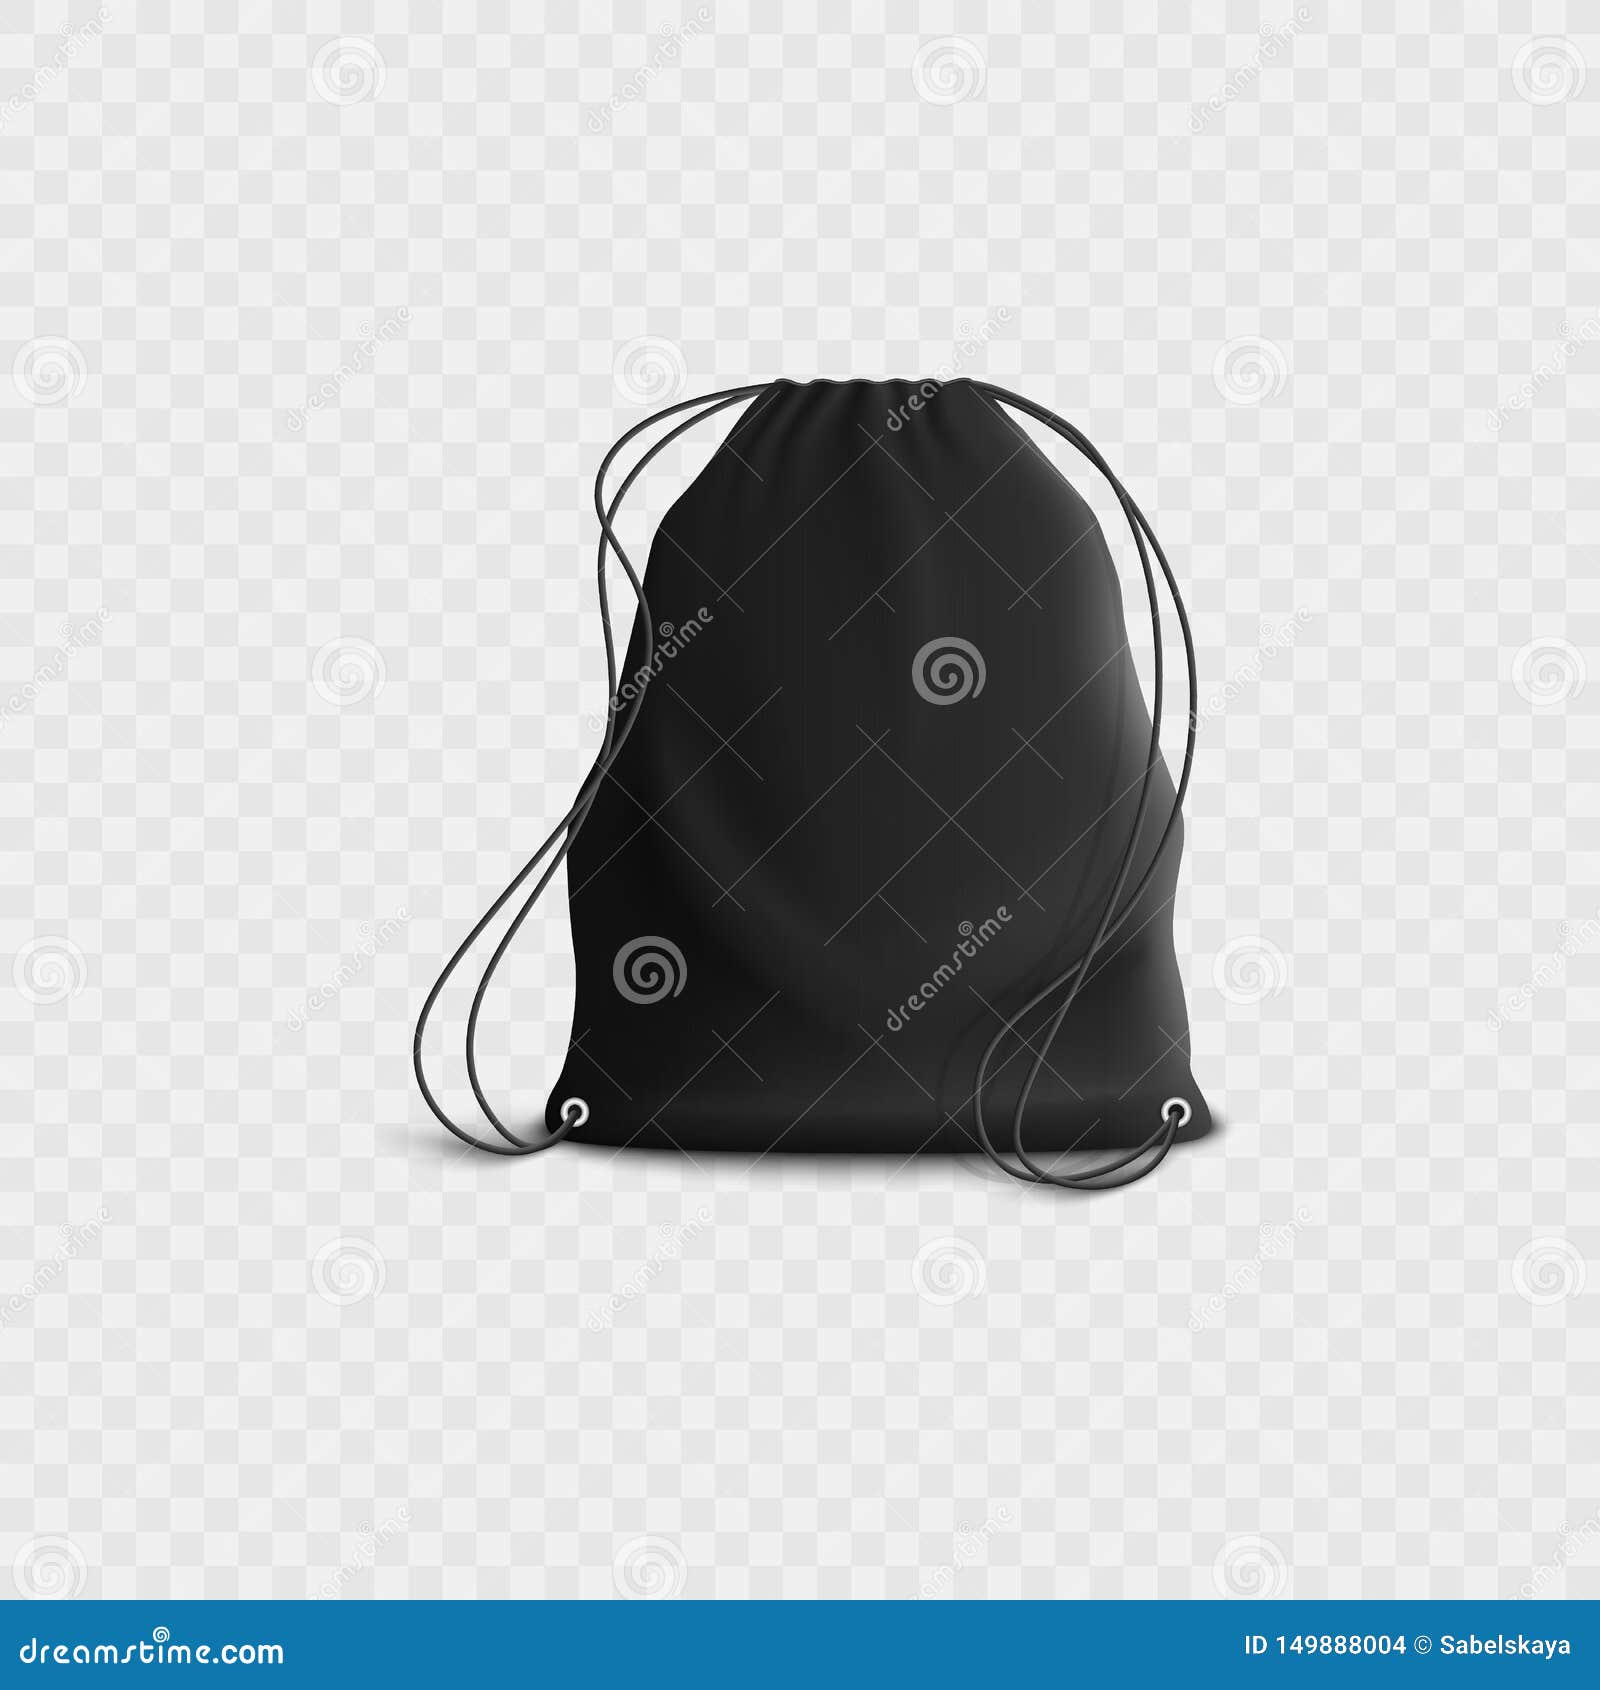 Download Black Backpack With Drawstring, Realistic Blank Sports Gym Bag Mockup With Rope Straps Stock ...